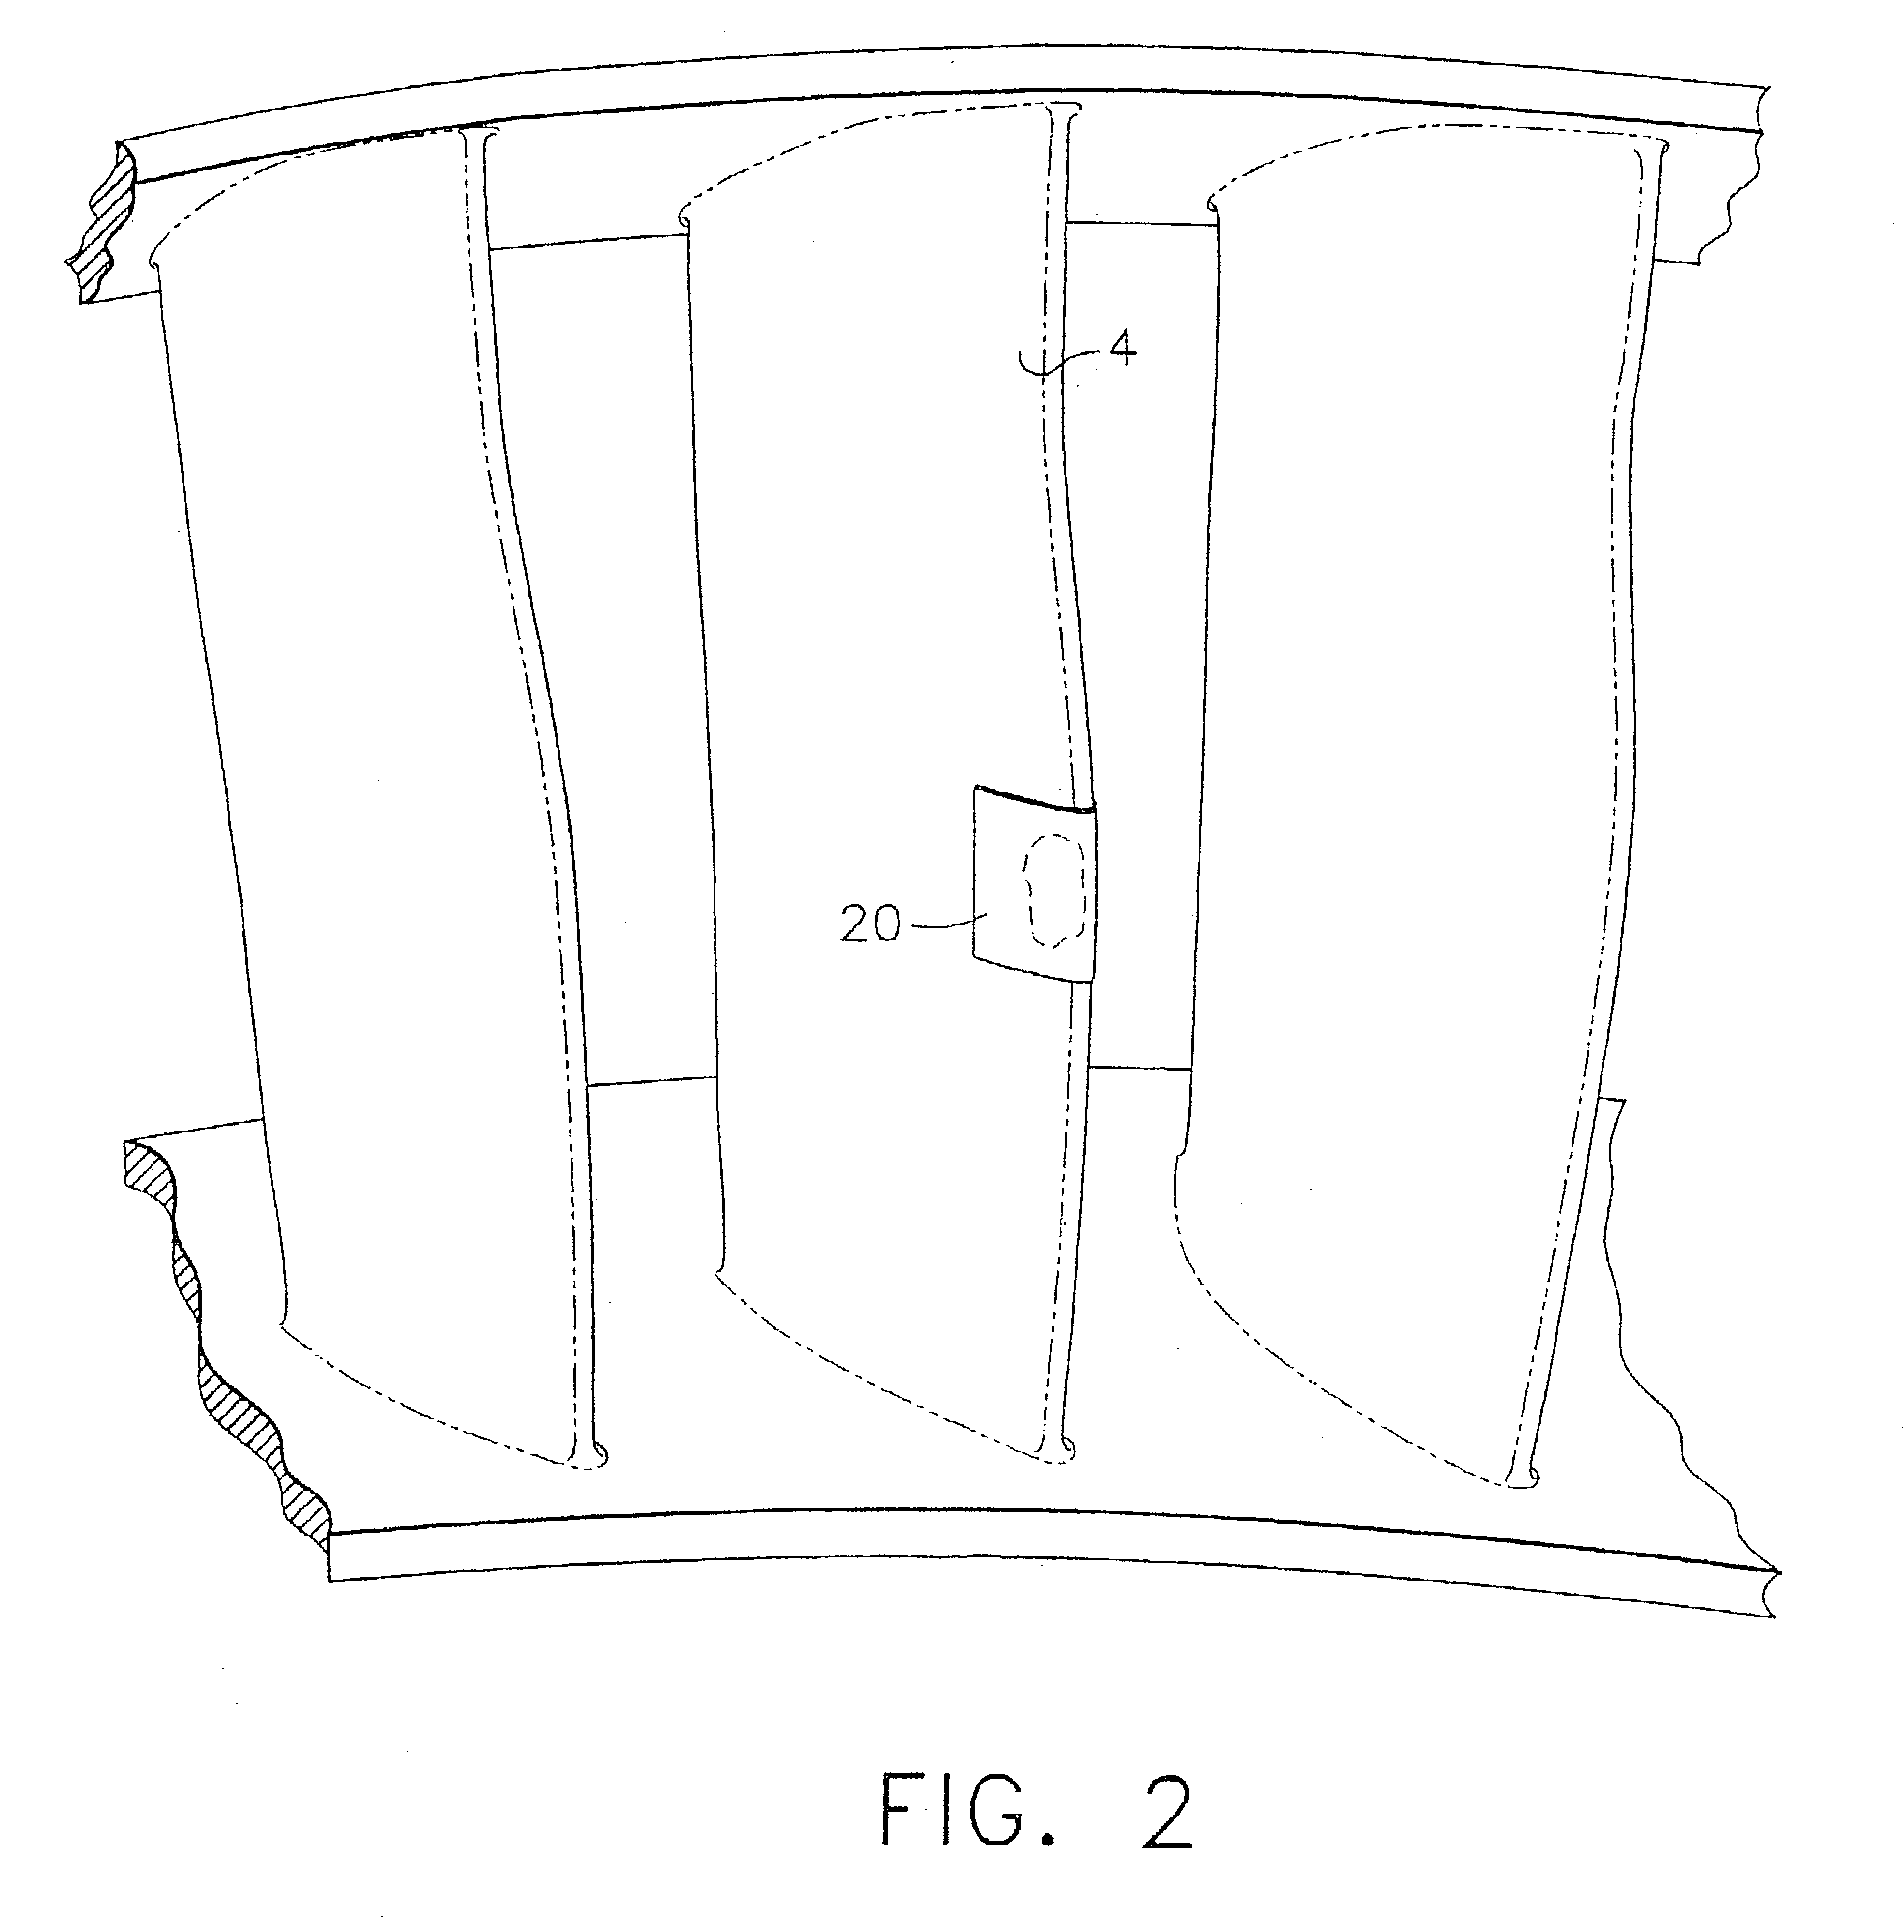 System for applying a diffusion aluminide coating on a selective area of a turbine engine component